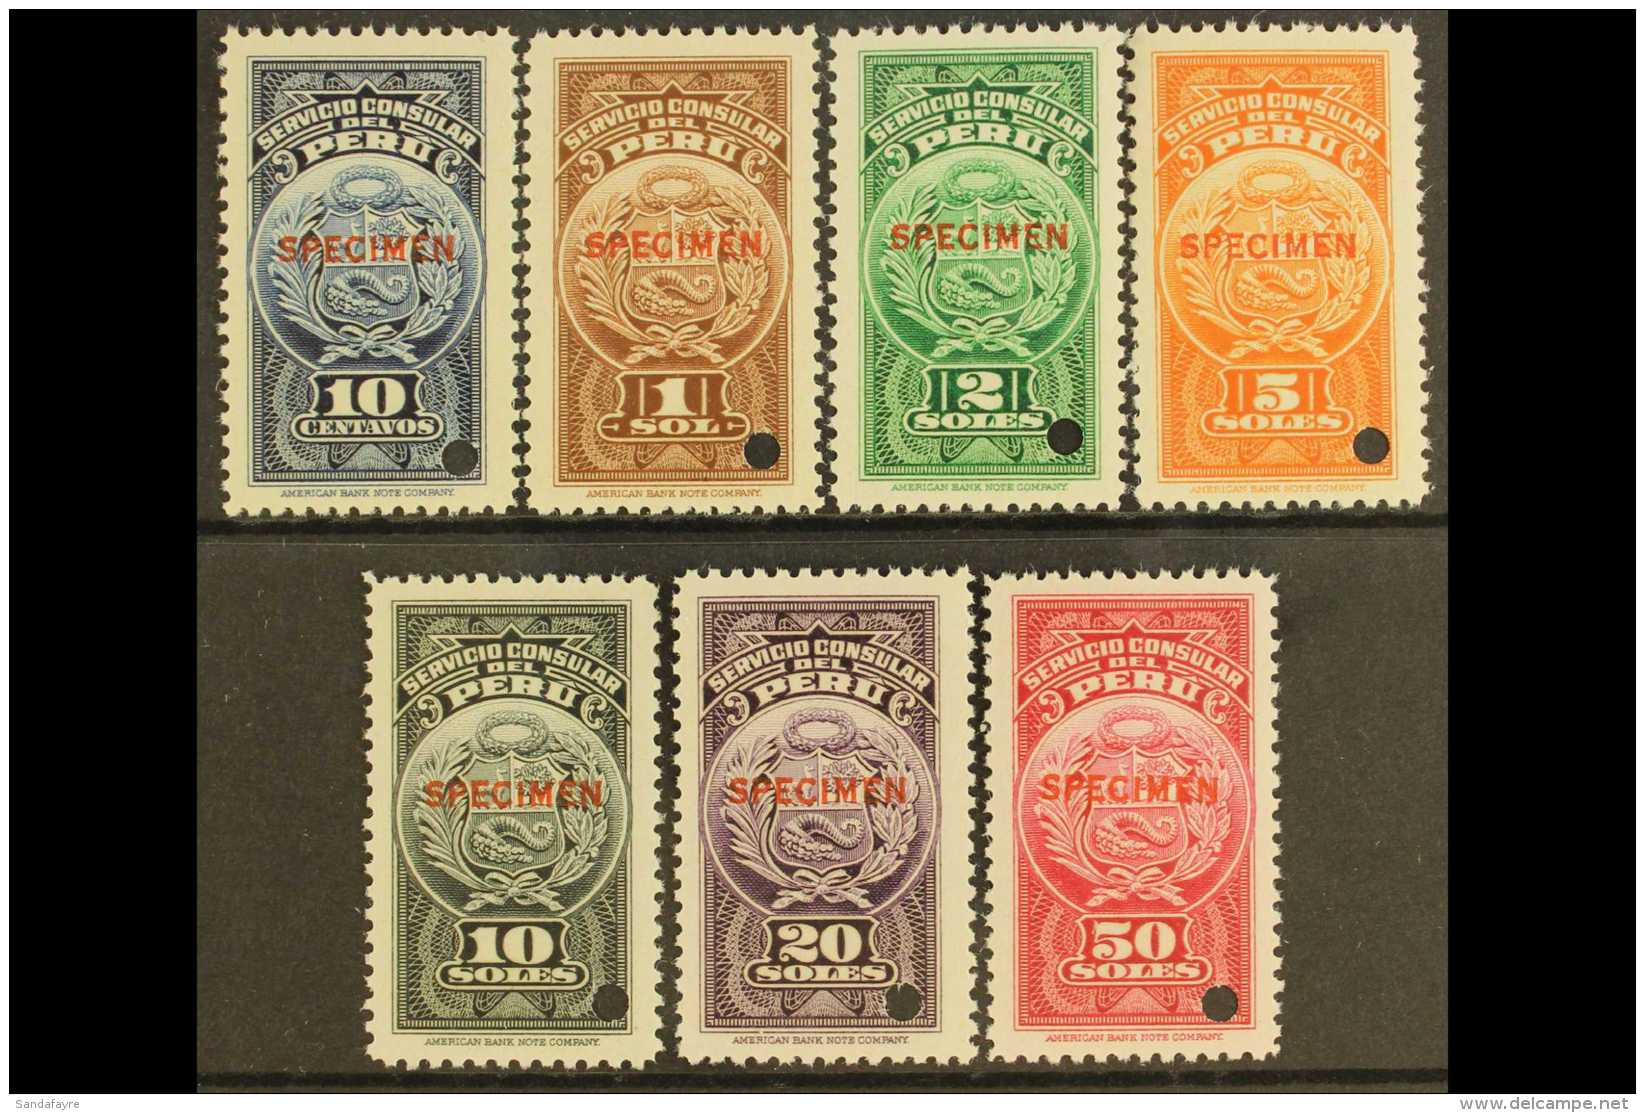 CONSULAR REVENUES 1938 Complete Set With "SPECIMEN" Overprints, Very Fine Never Hinged Mint, With Small Security... - Pérou